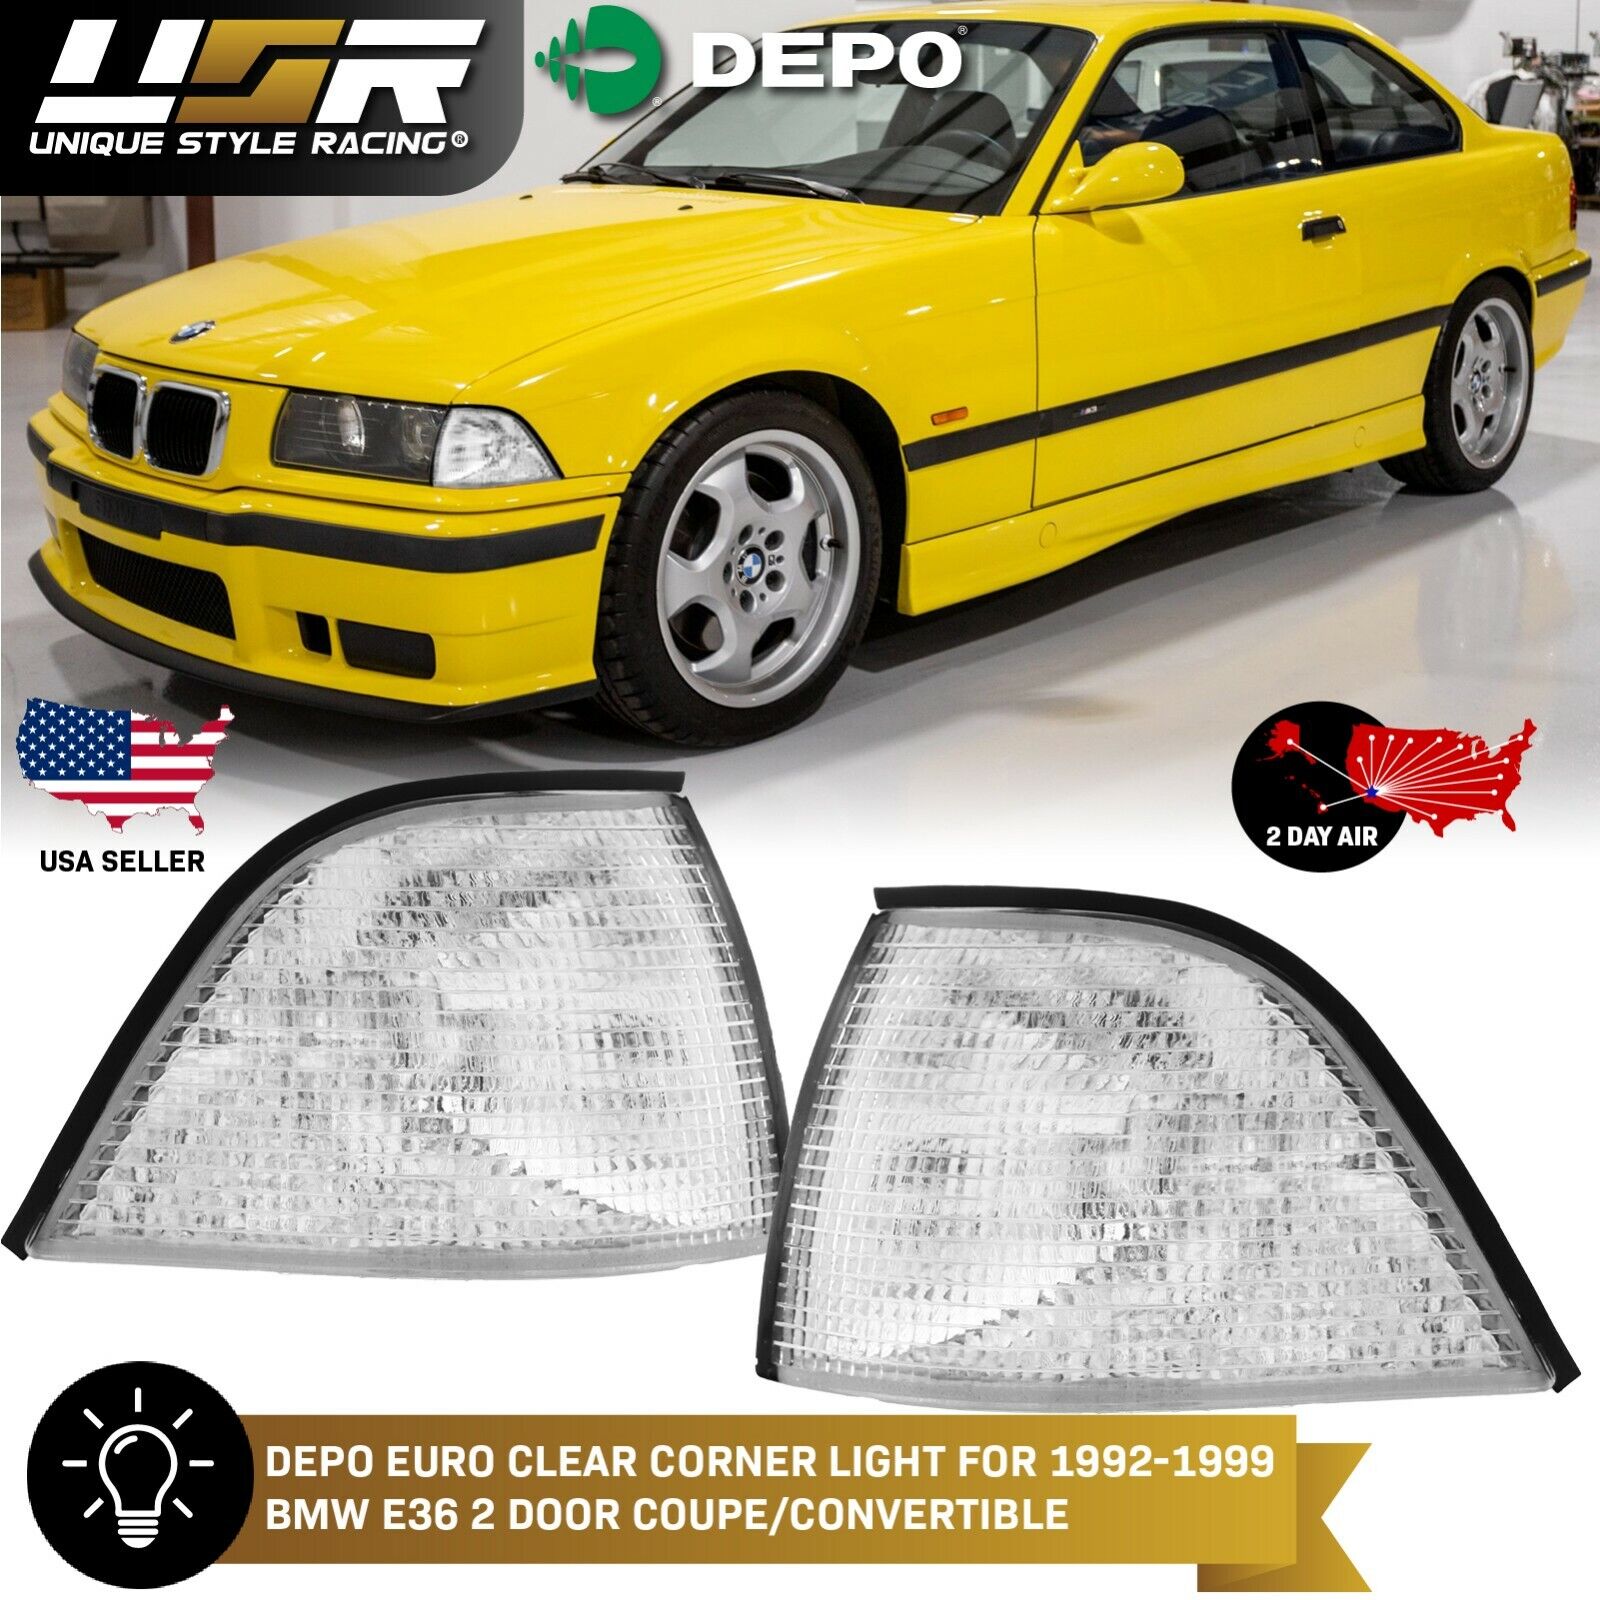 2 Day Air DEPO Euro Clear Corner Light Pair For 92-99 BMW E36 2D Coupe/Cabrio M3